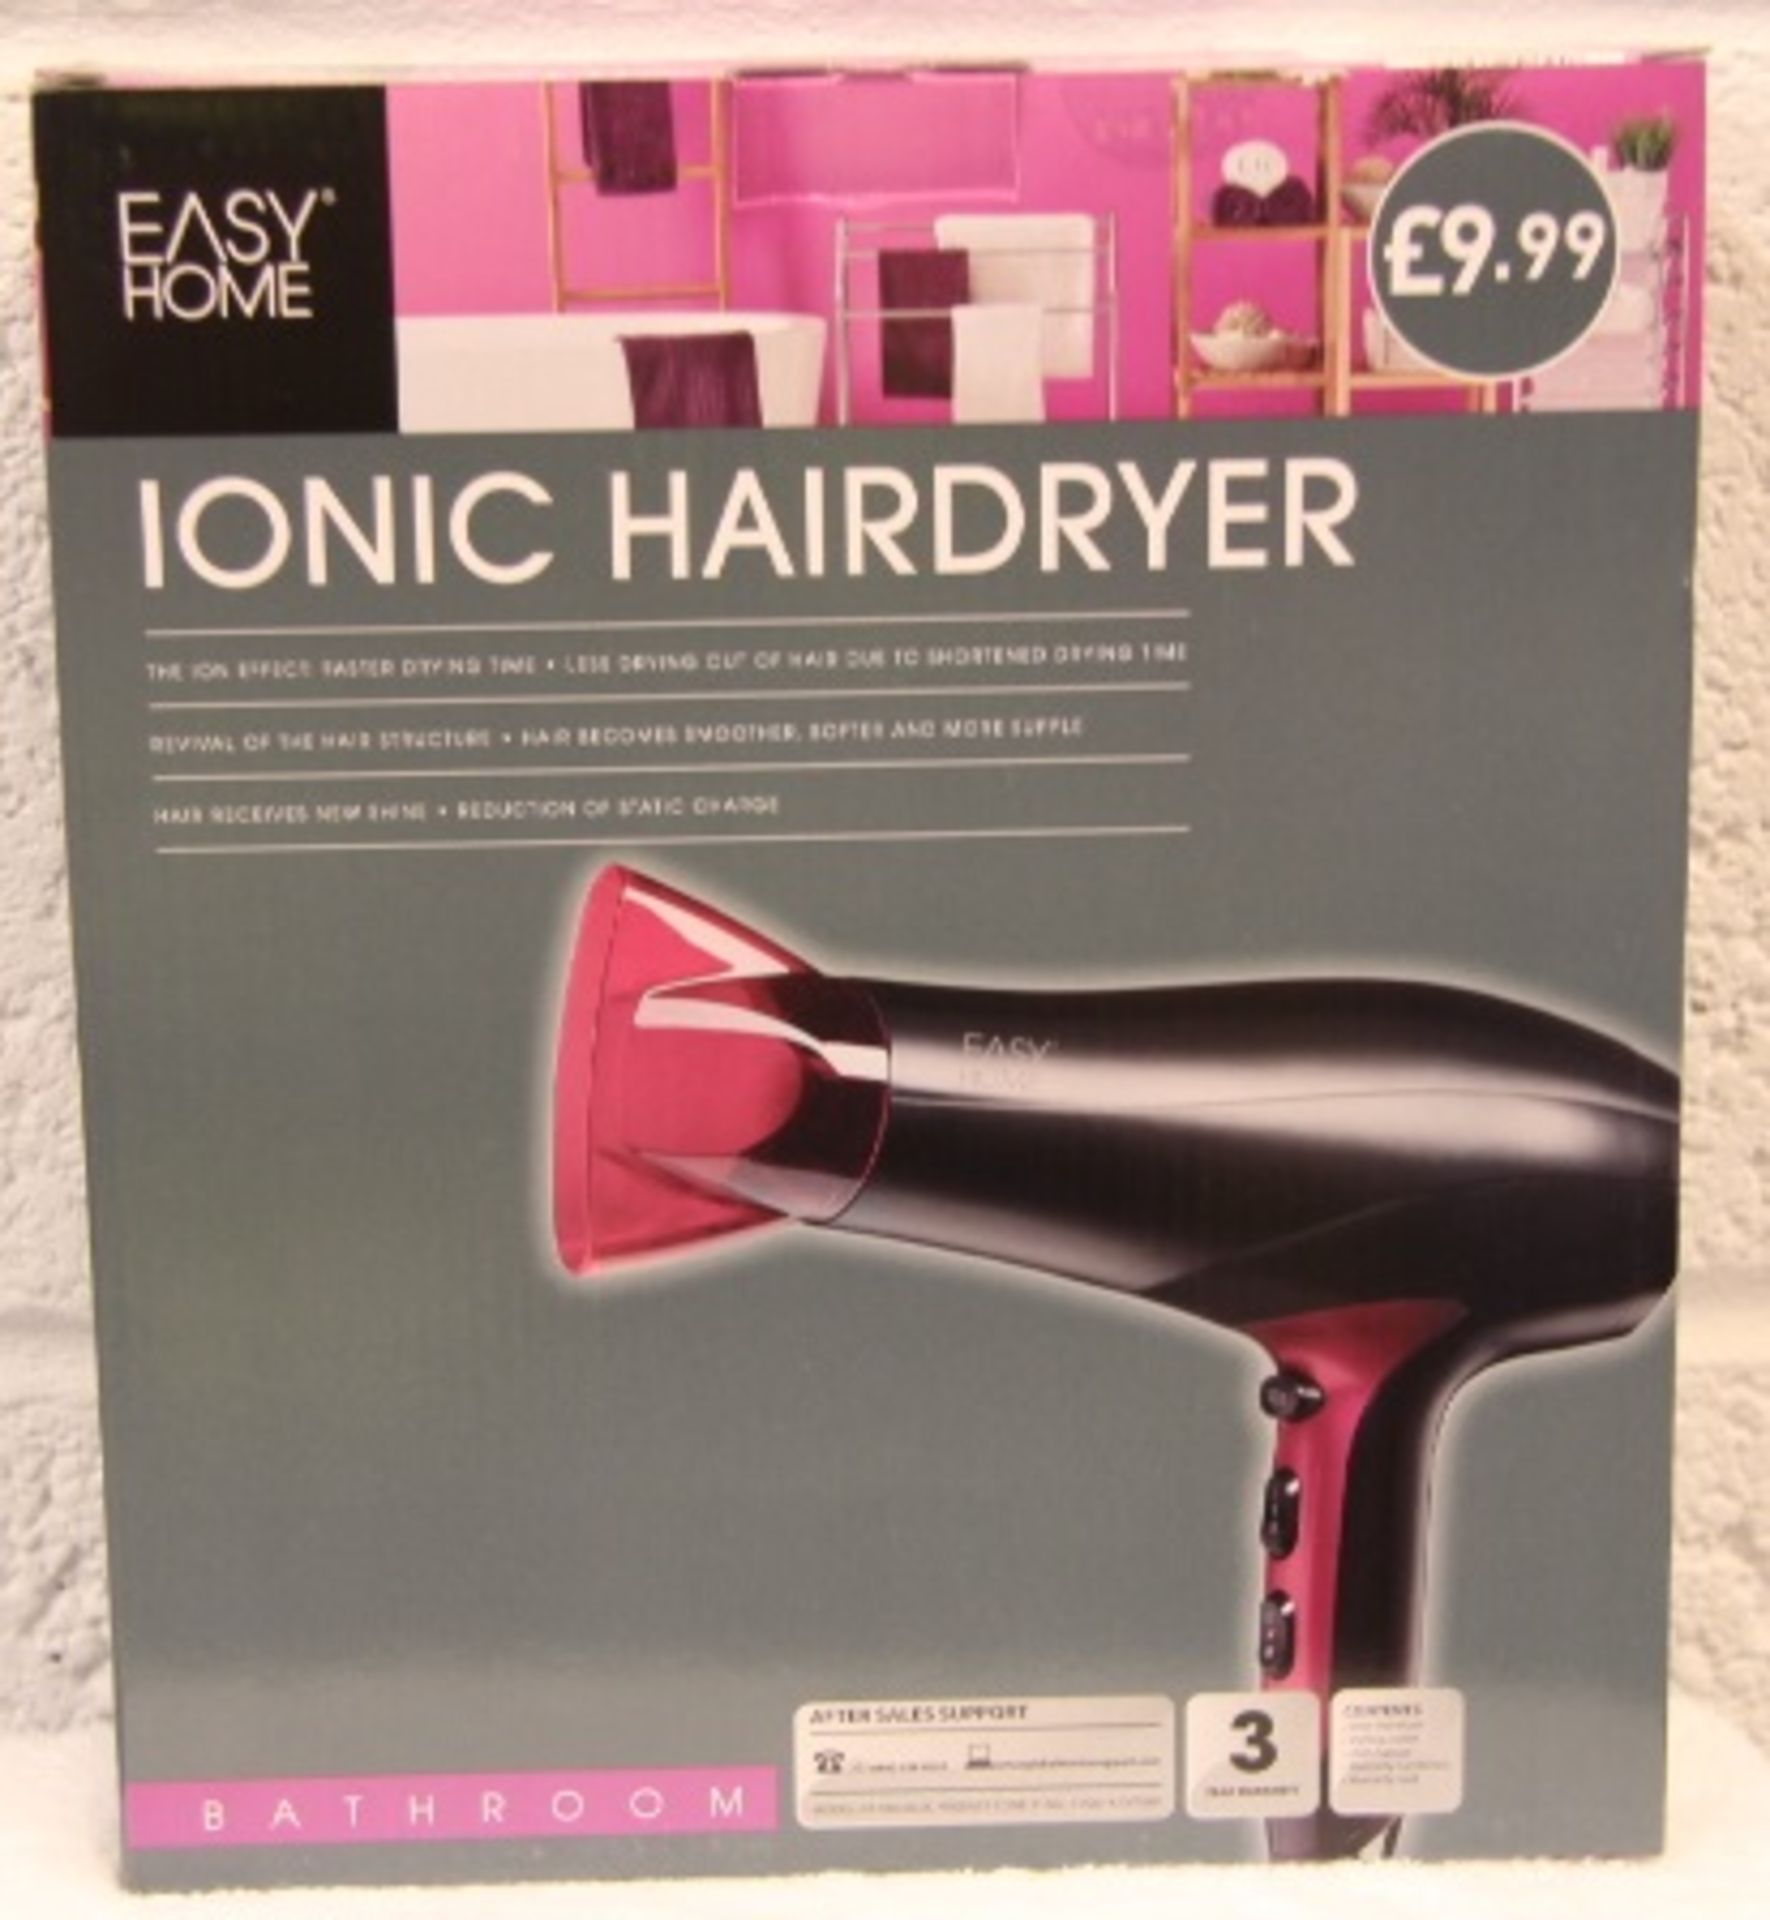 V Brand New Easy Home Ionic Hairdryer-Faster Drying-Revival Of The Hair Structure X 2 YOUR BID PRICE